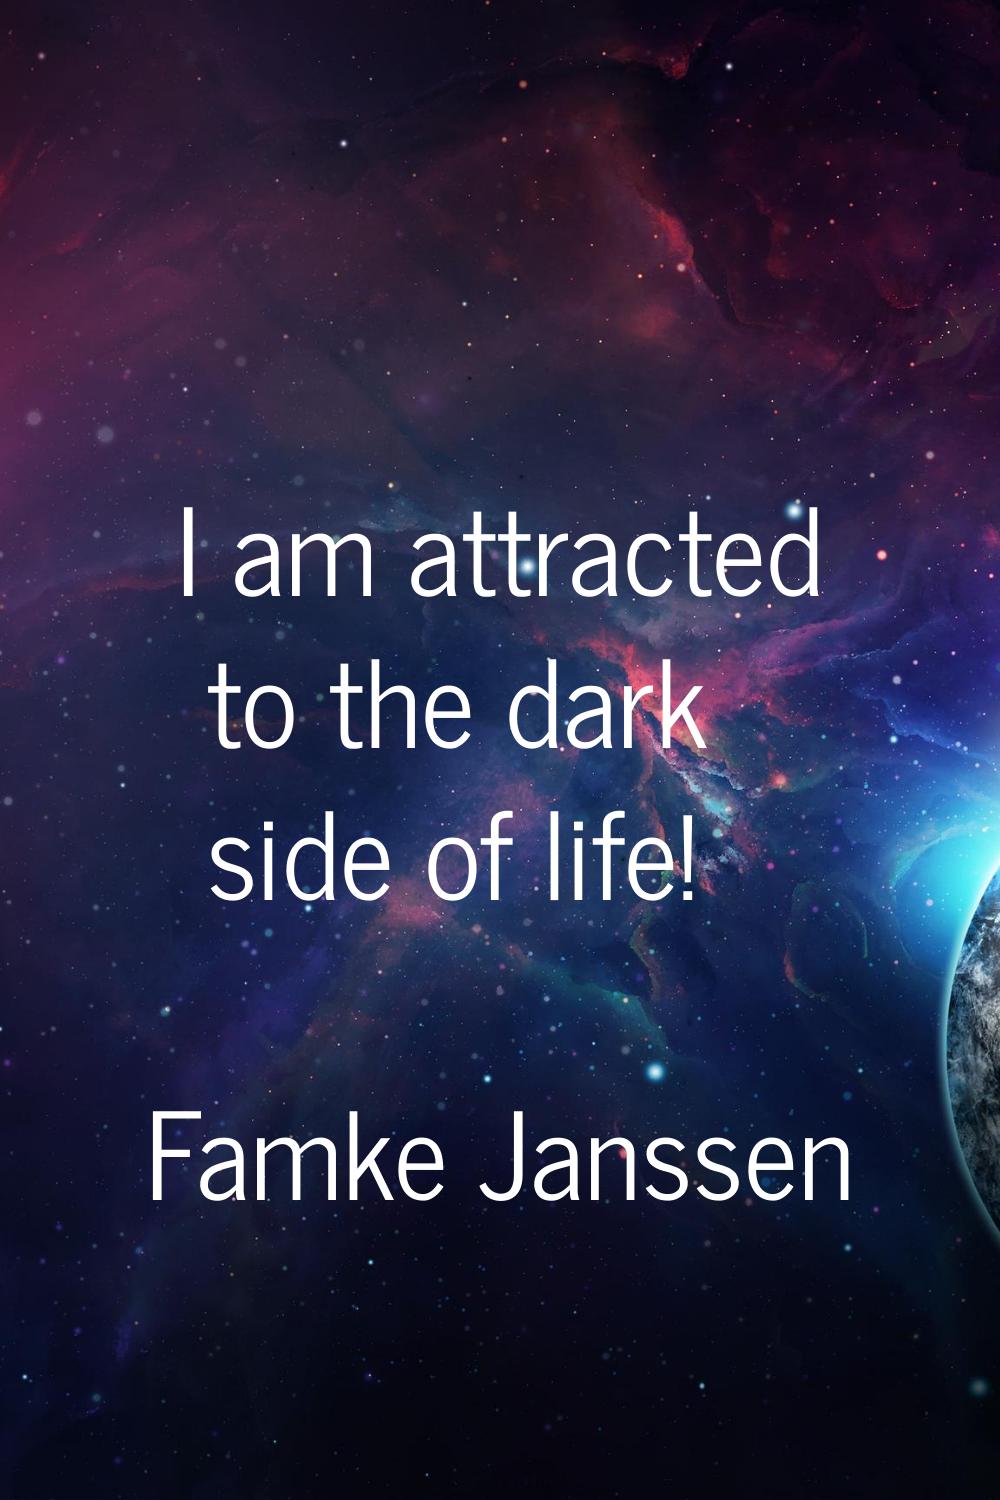 I am attracted to the dark side of life!